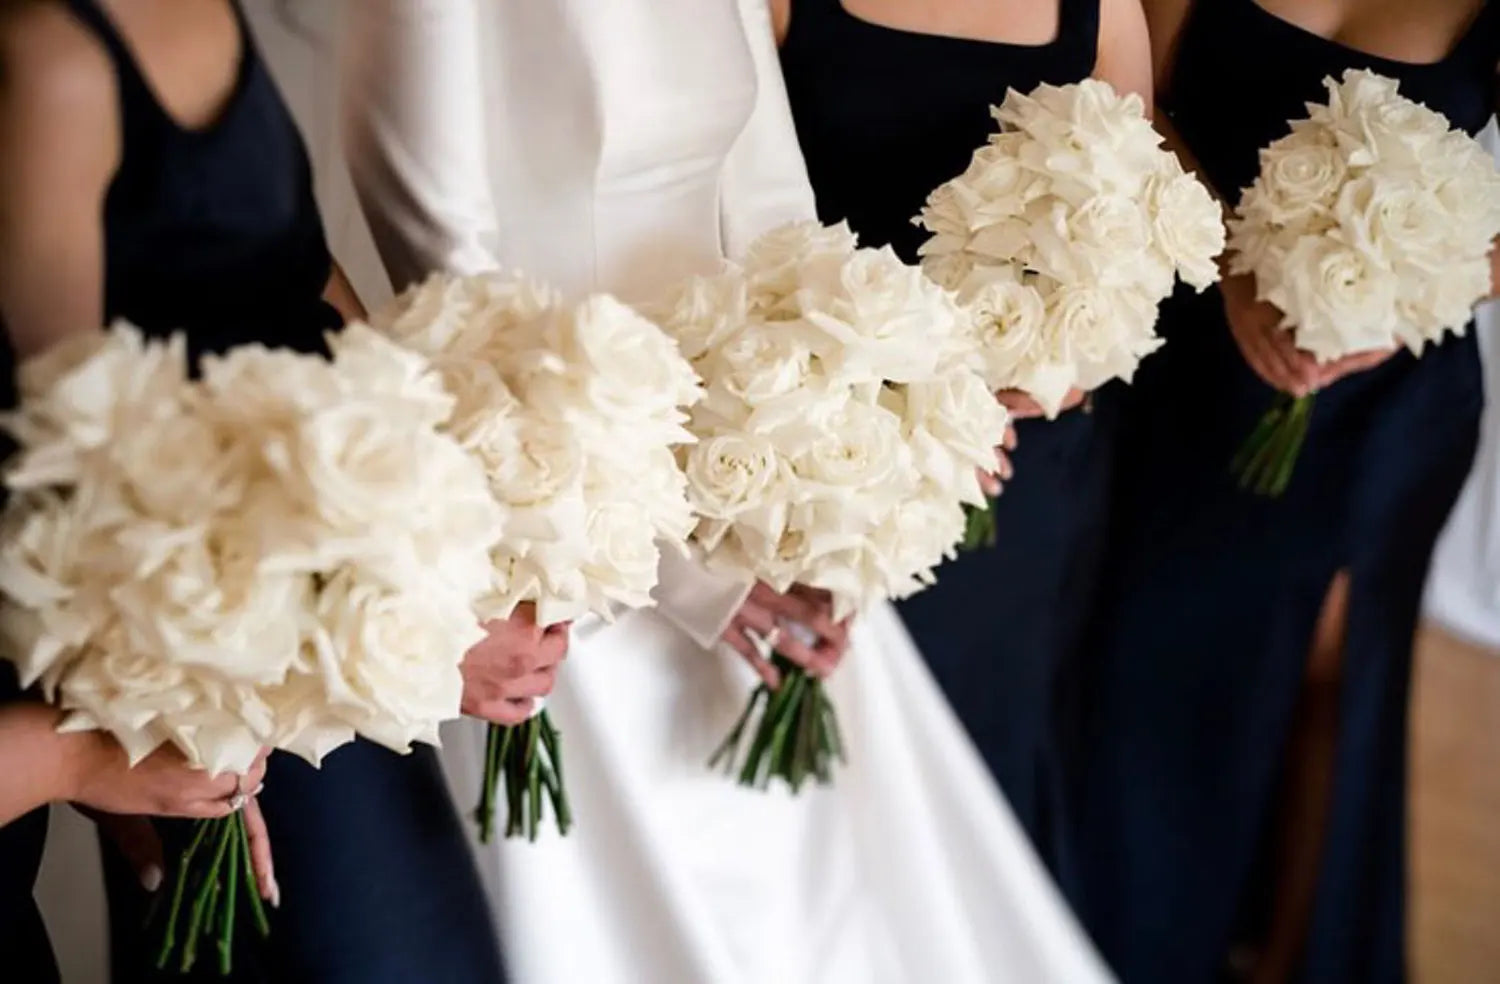 Elegant bridal bouquets lined up, featuring white roses, bridesmaids in navy blue and bride in the centre wearing white